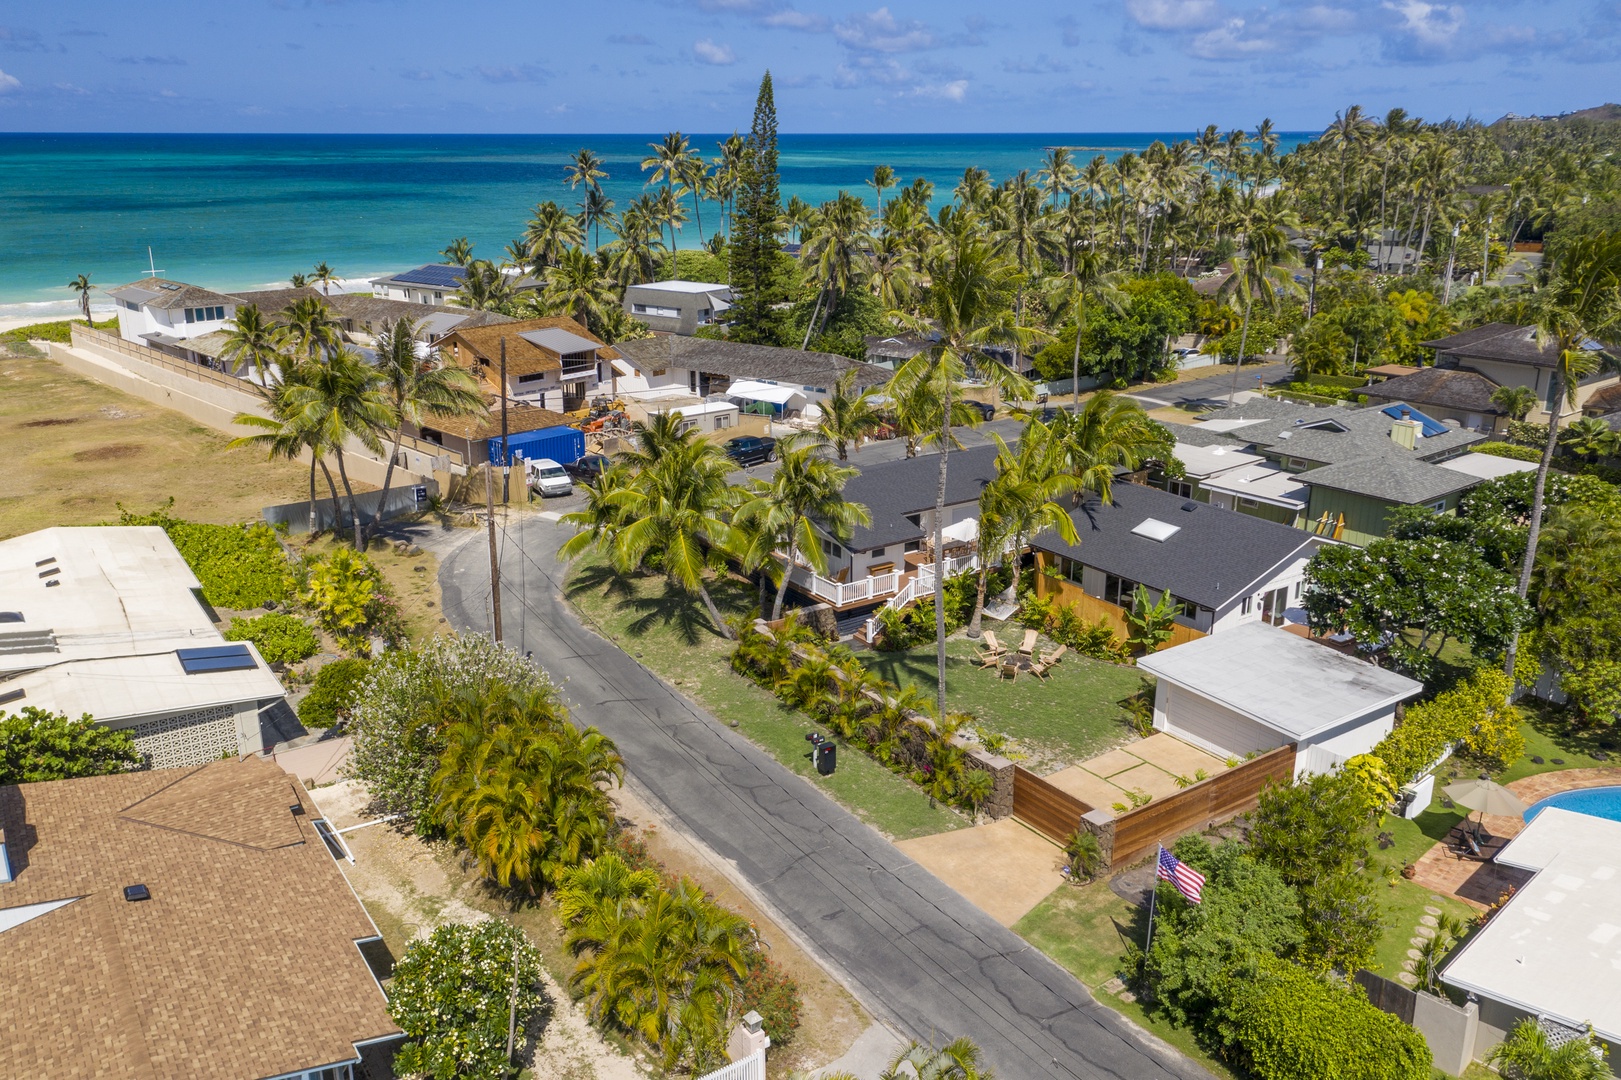 Kailua Vacation Rentals, Seahorse Beach House - Perched on an elevated corner lot, enjoy the breathtaking blend of ocean waves and majestic mountain peaks.